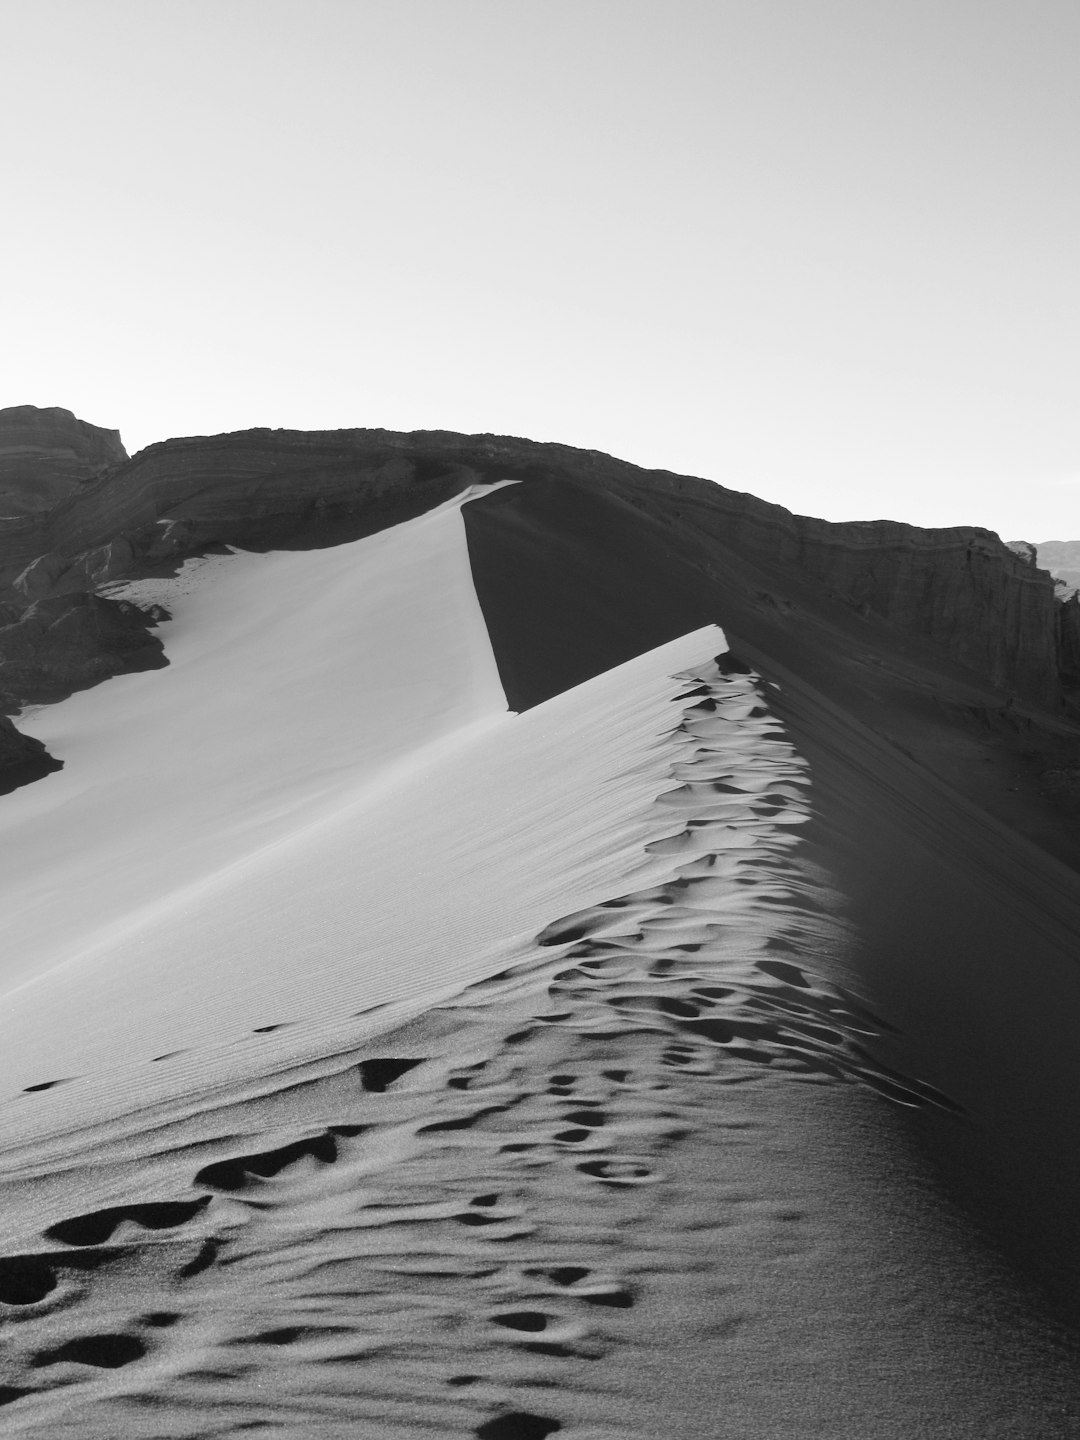 grayscale photography of footprints on desert mountain